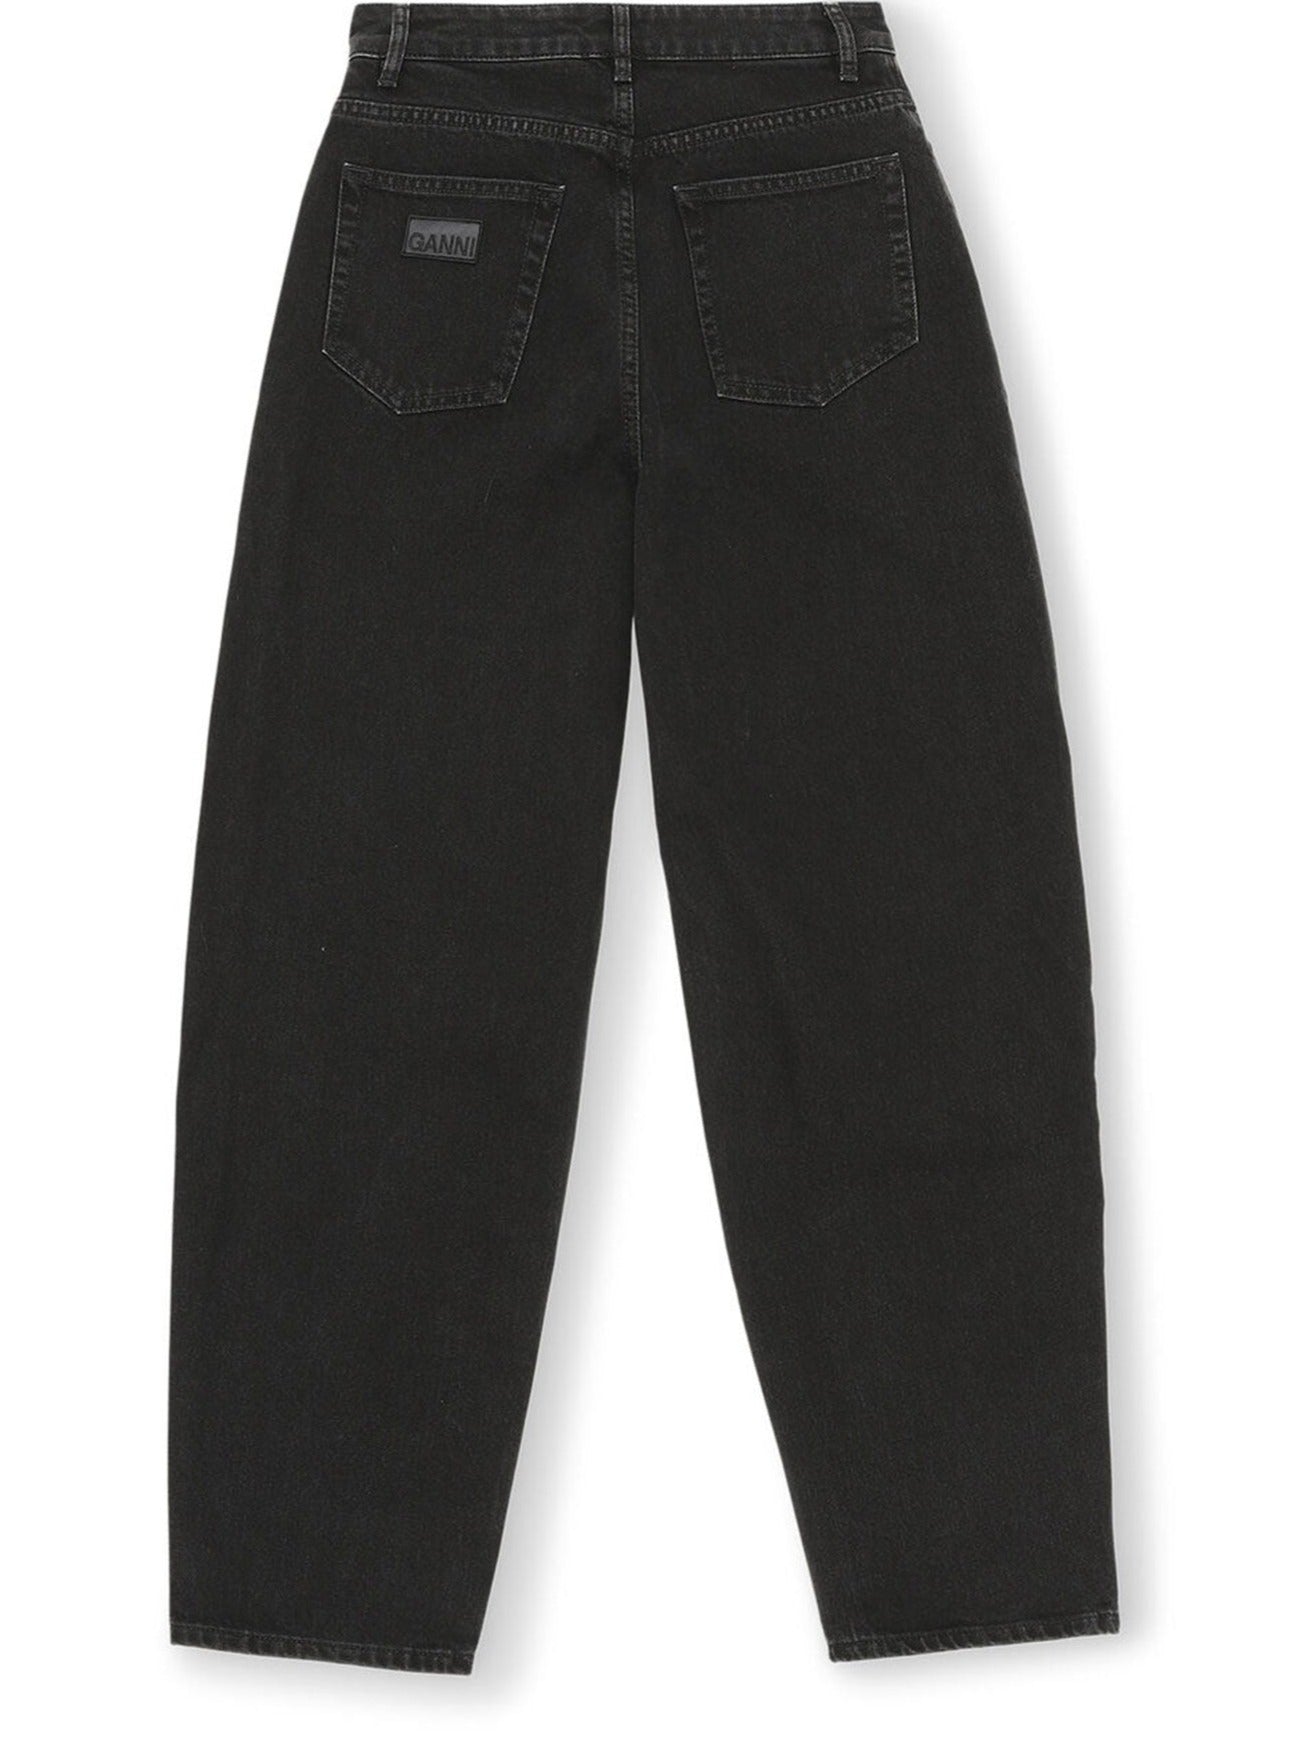 Stary jeans, washed black/black